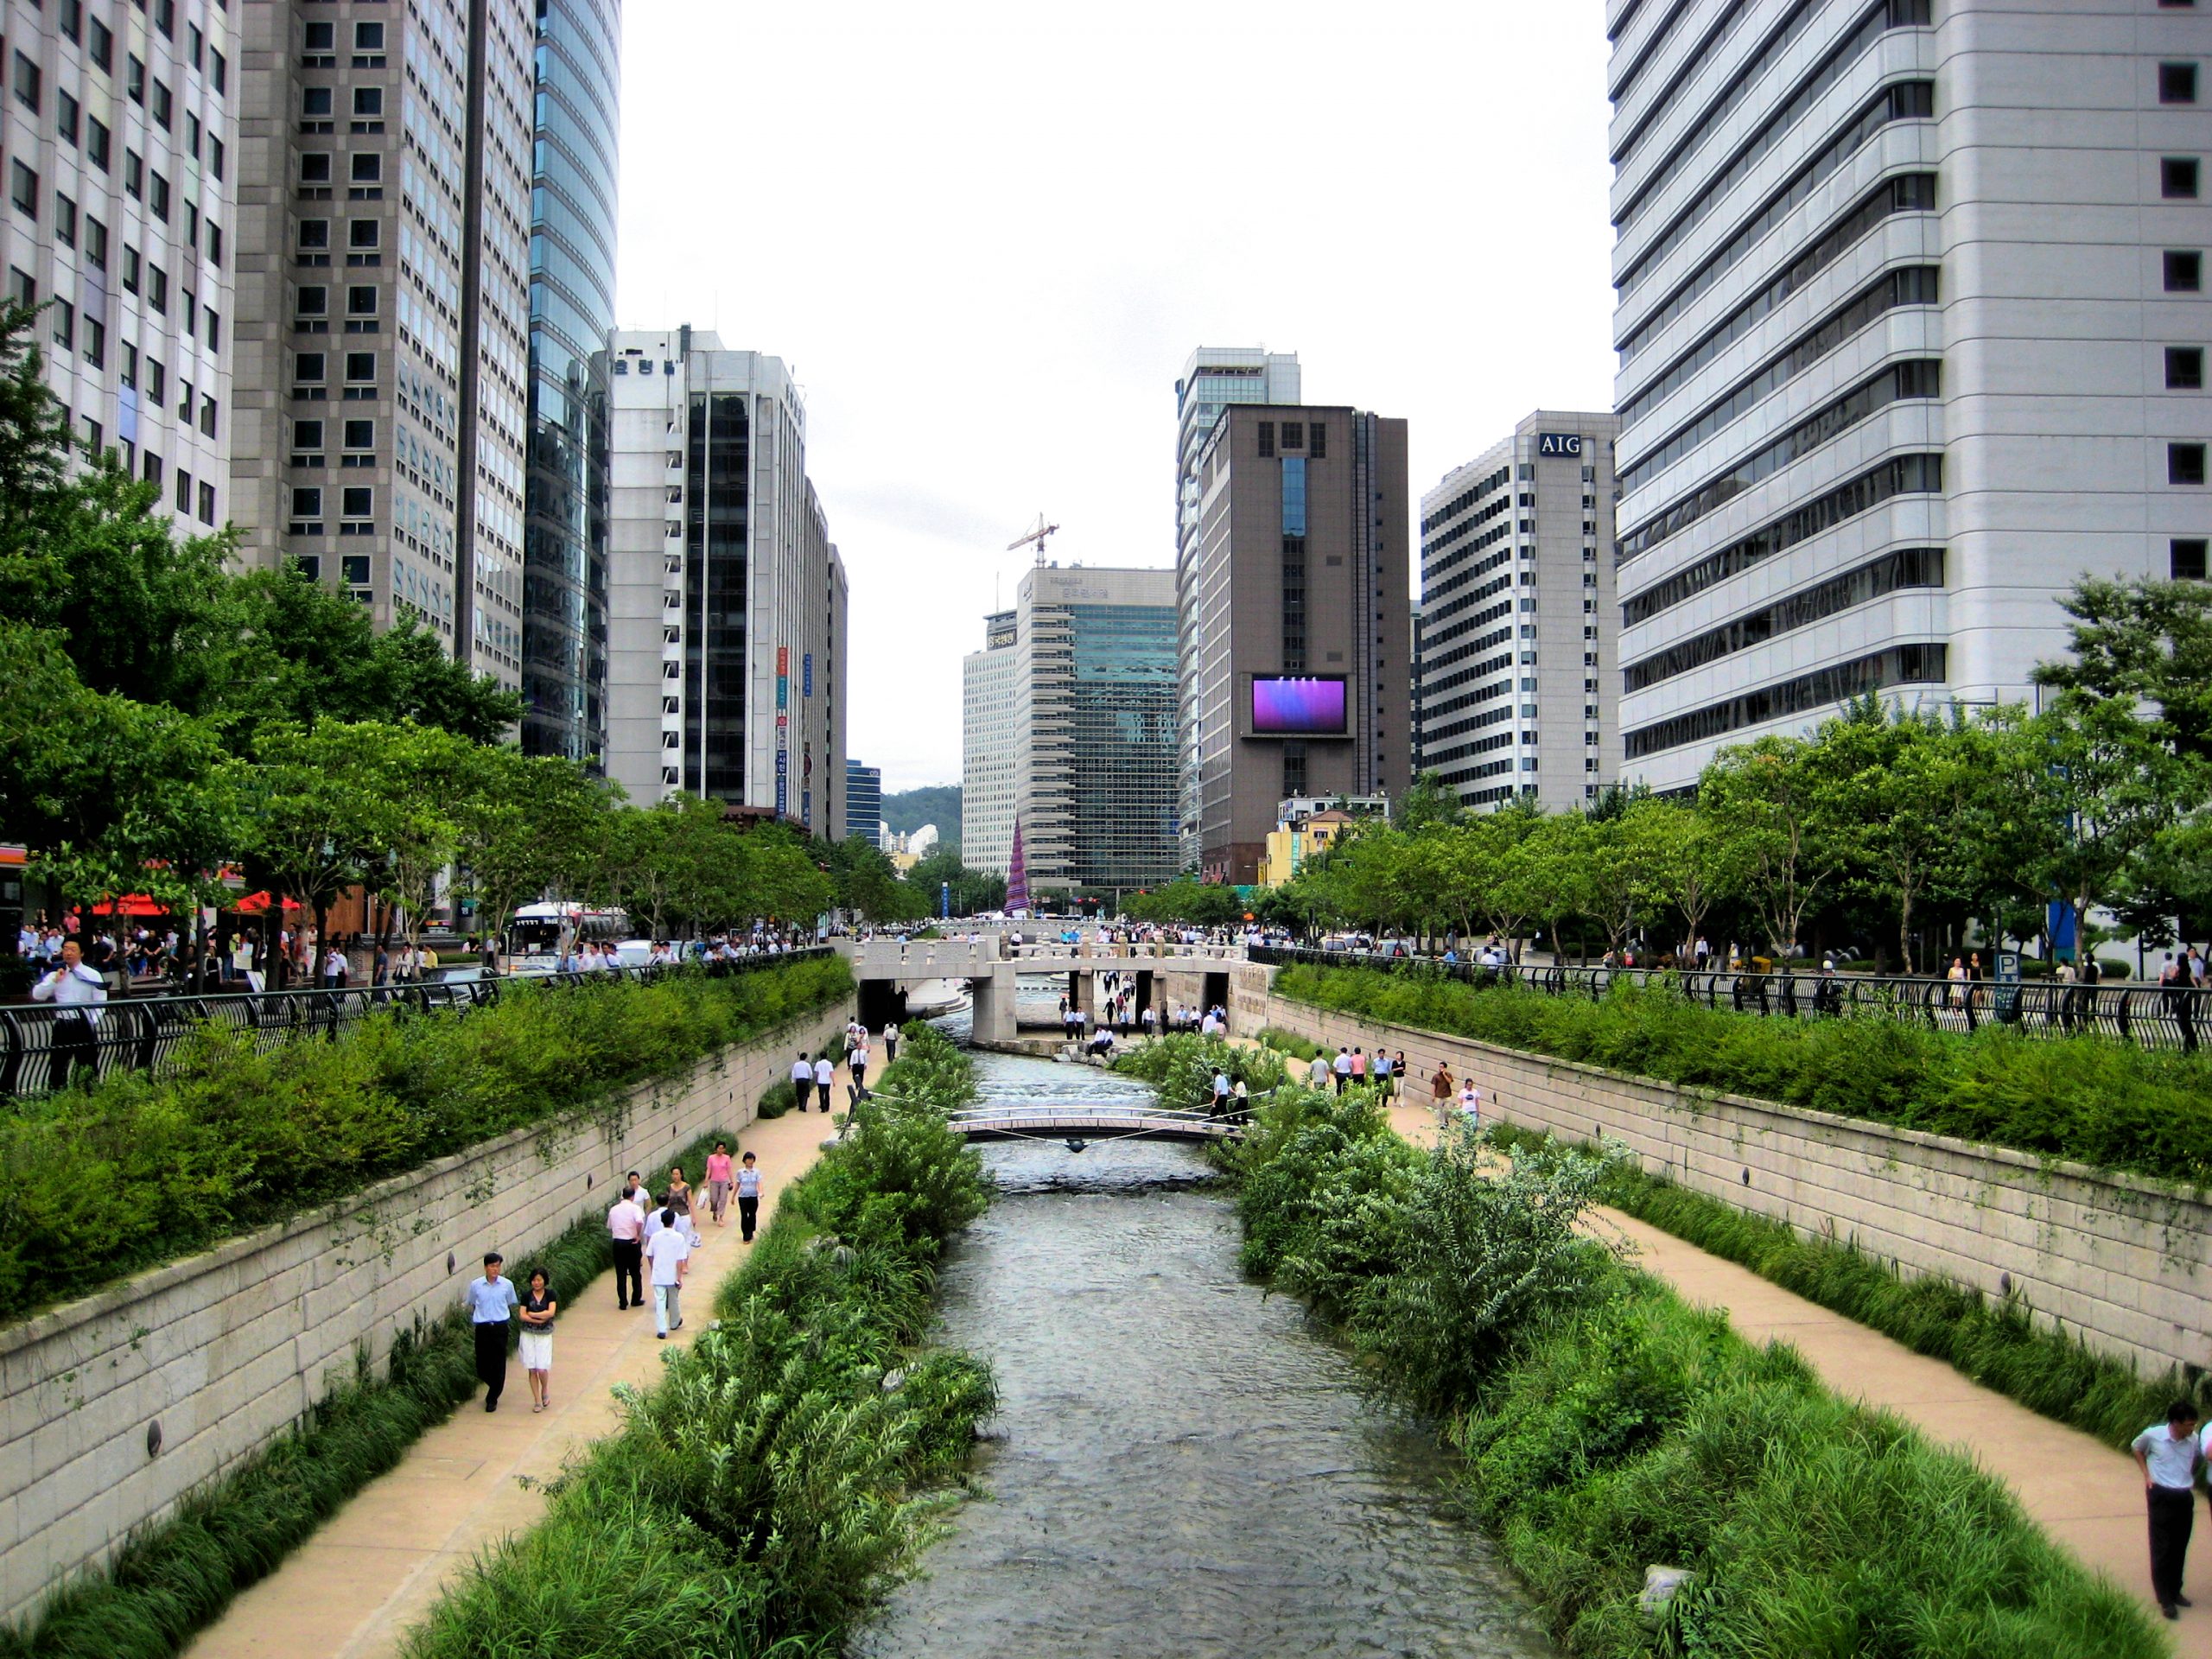 An urban stream lined with pedestrian walkways, retaining walls, city streets, and high rise buildings.